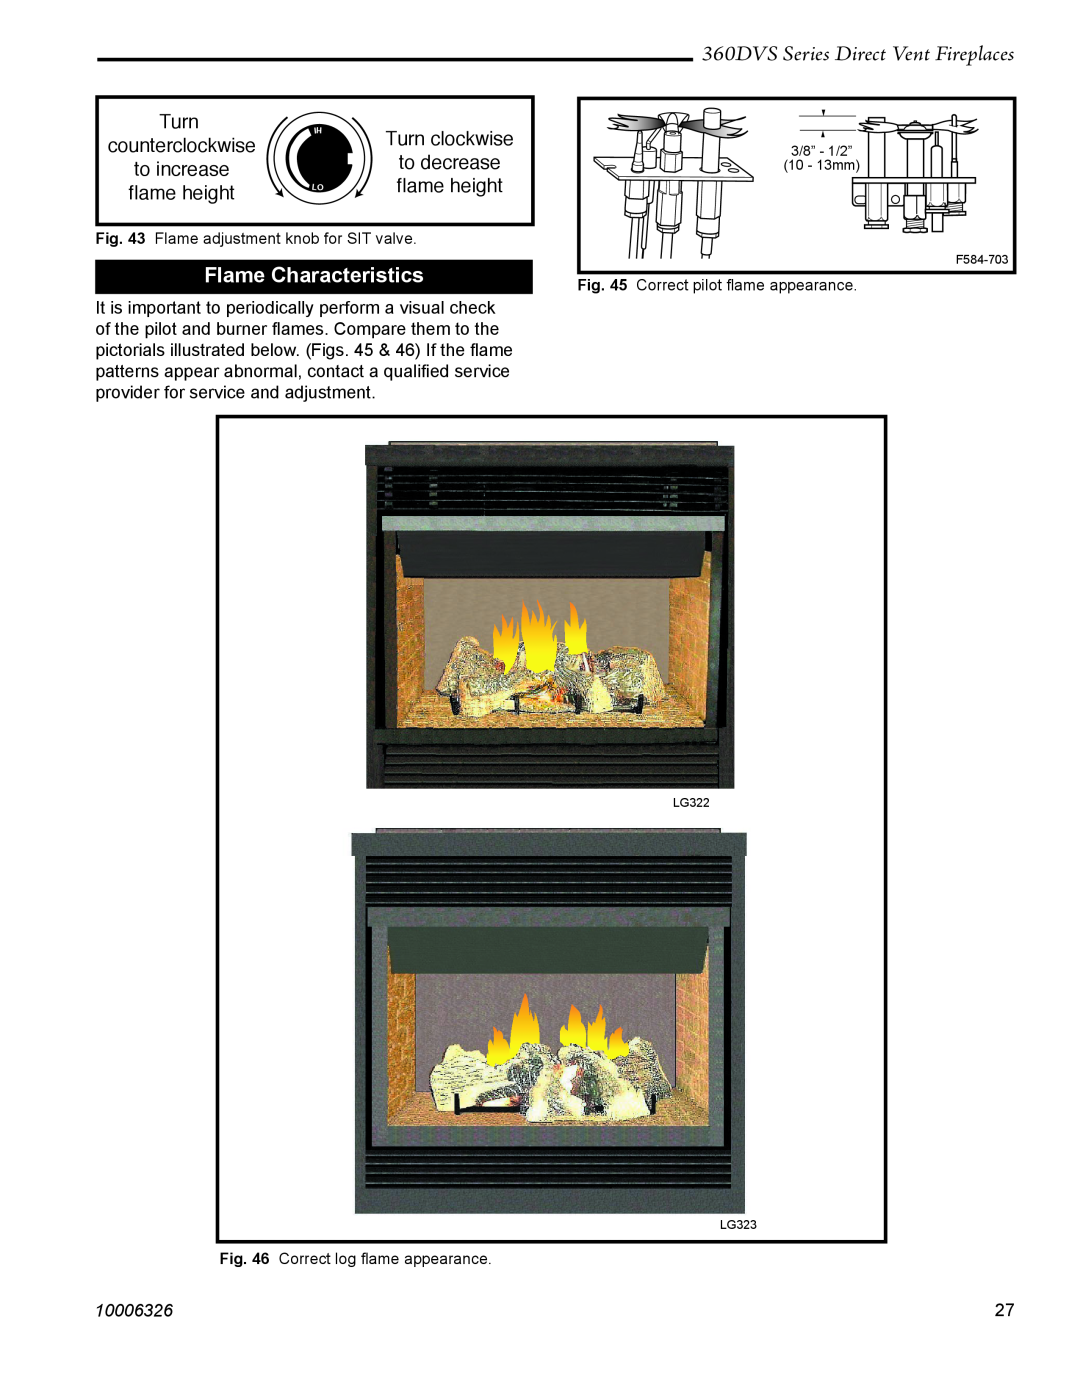 Majestic Appliances 360DVS2 Flame Characteristics, 360DVS Series Direct Vent Fireplaces, Turn, counterclockwise, 10006326 